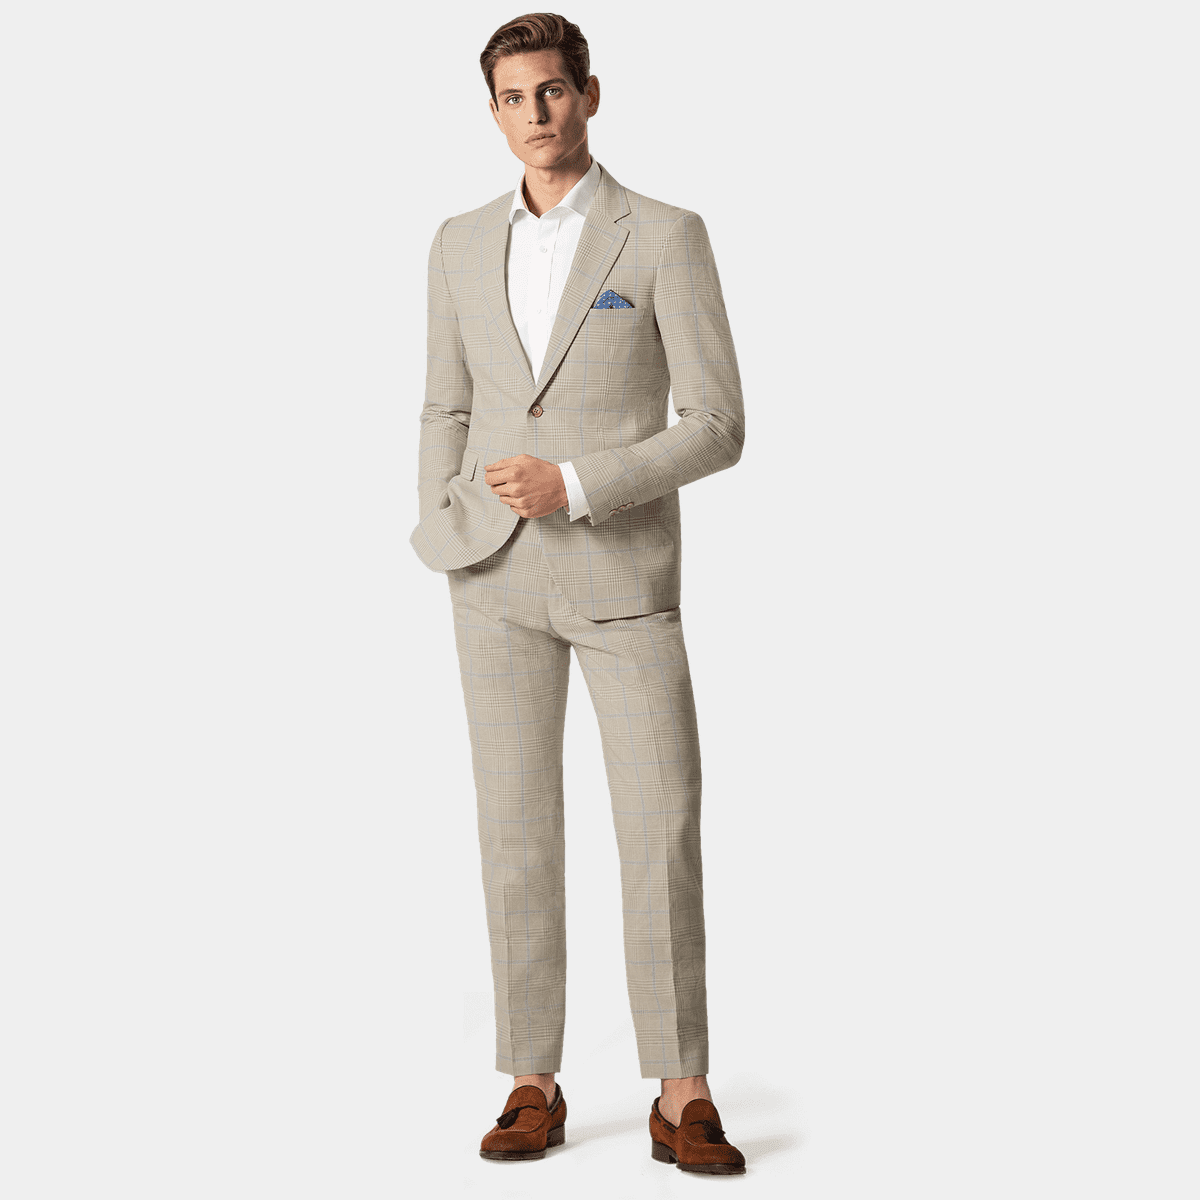 Men Linen Suit Summer Causal Wear Blazer Two Button Clsssic Fit Tuxedos  Tailored